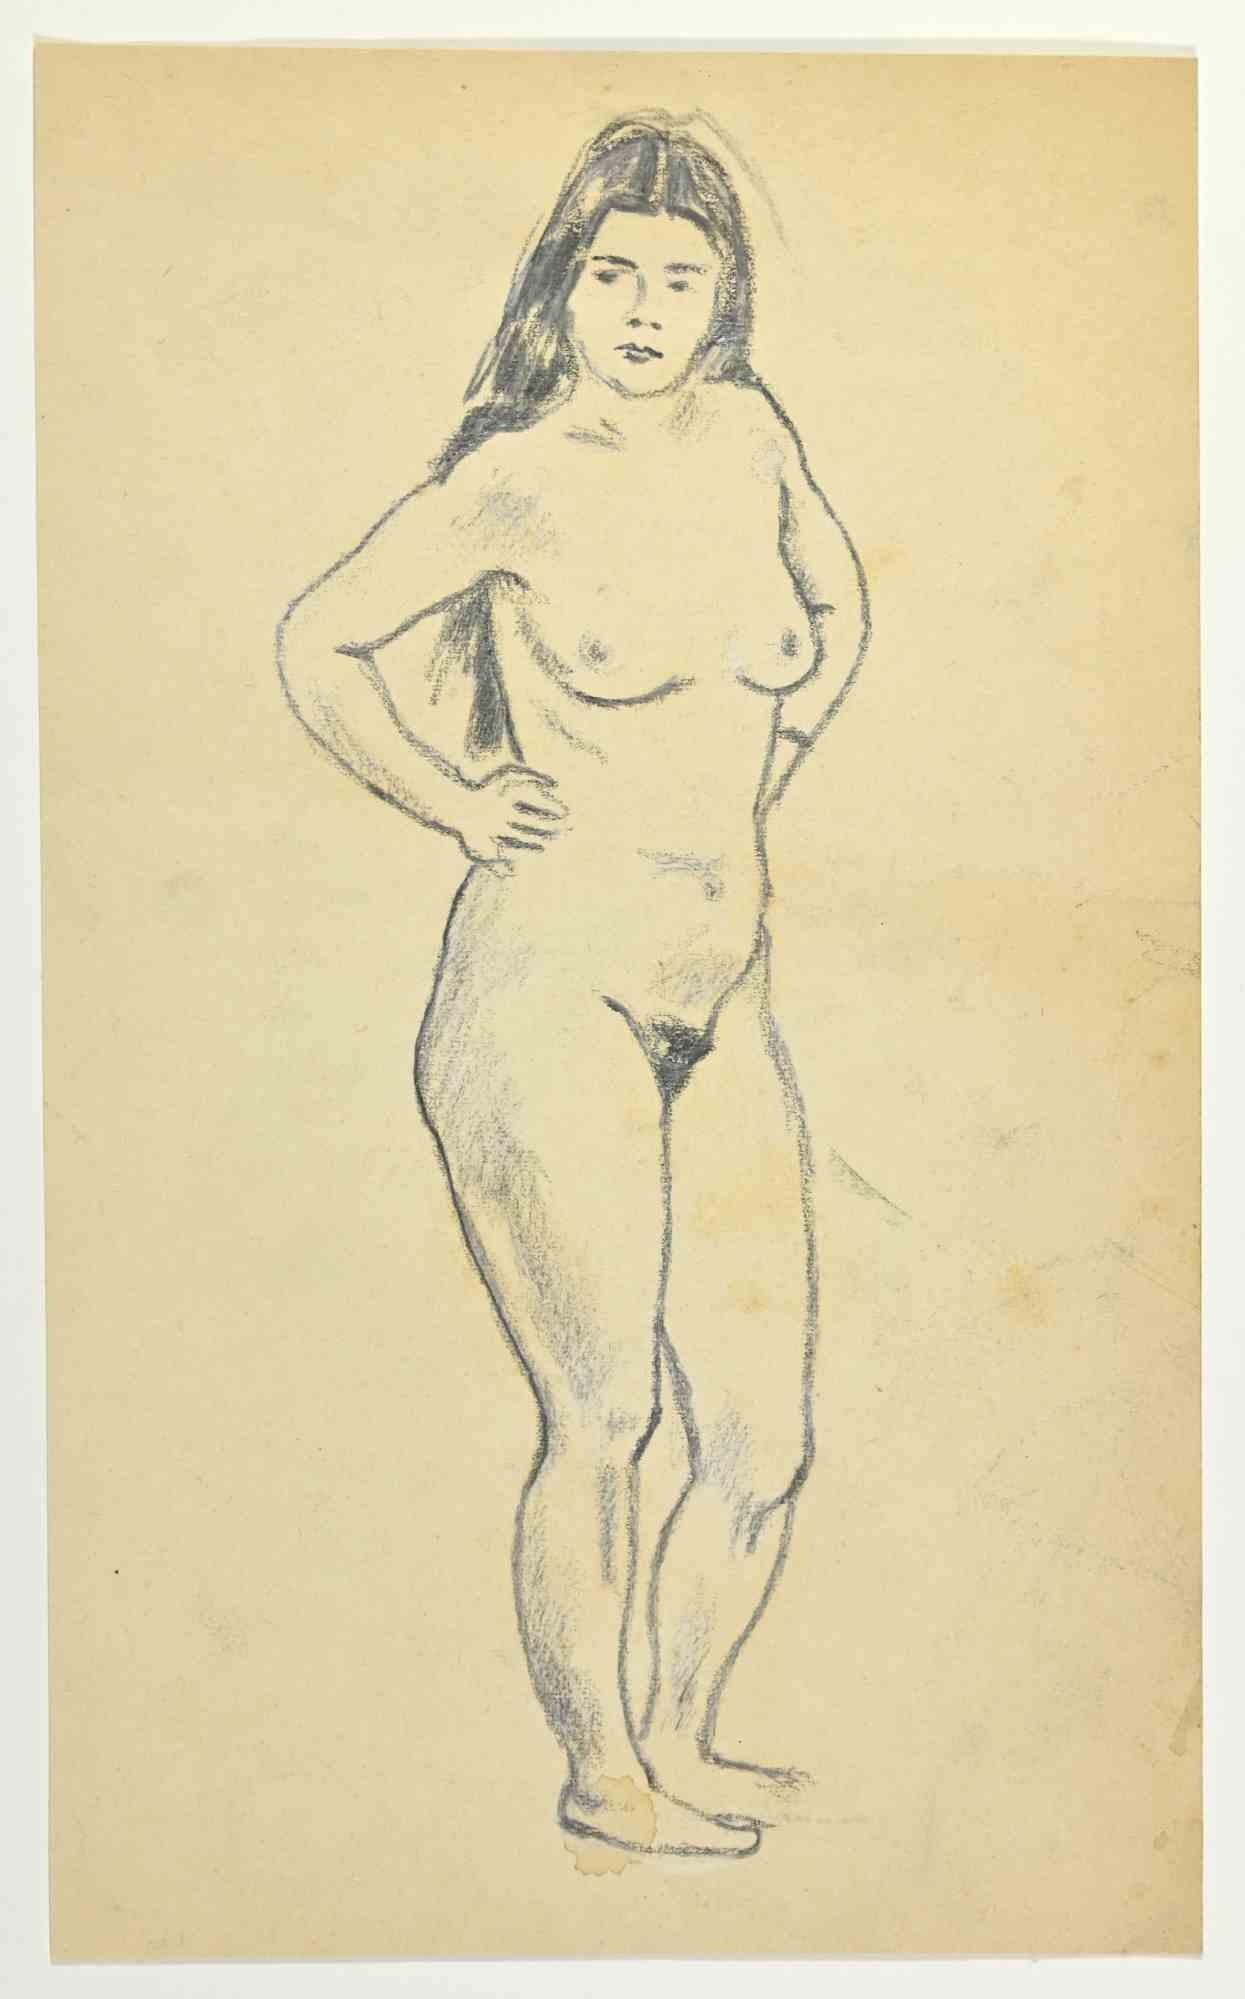 Nude is a Pencil Drawing realized by Mino Maccari  (1924-1989) in 1928.

Good condition.

Mino Maccari (Siena, 1924-Rome, June 16, 1989) was an Italian writer, painter, engraver and journalist, winner of the Feltrinelli Prize for Painting in 1963